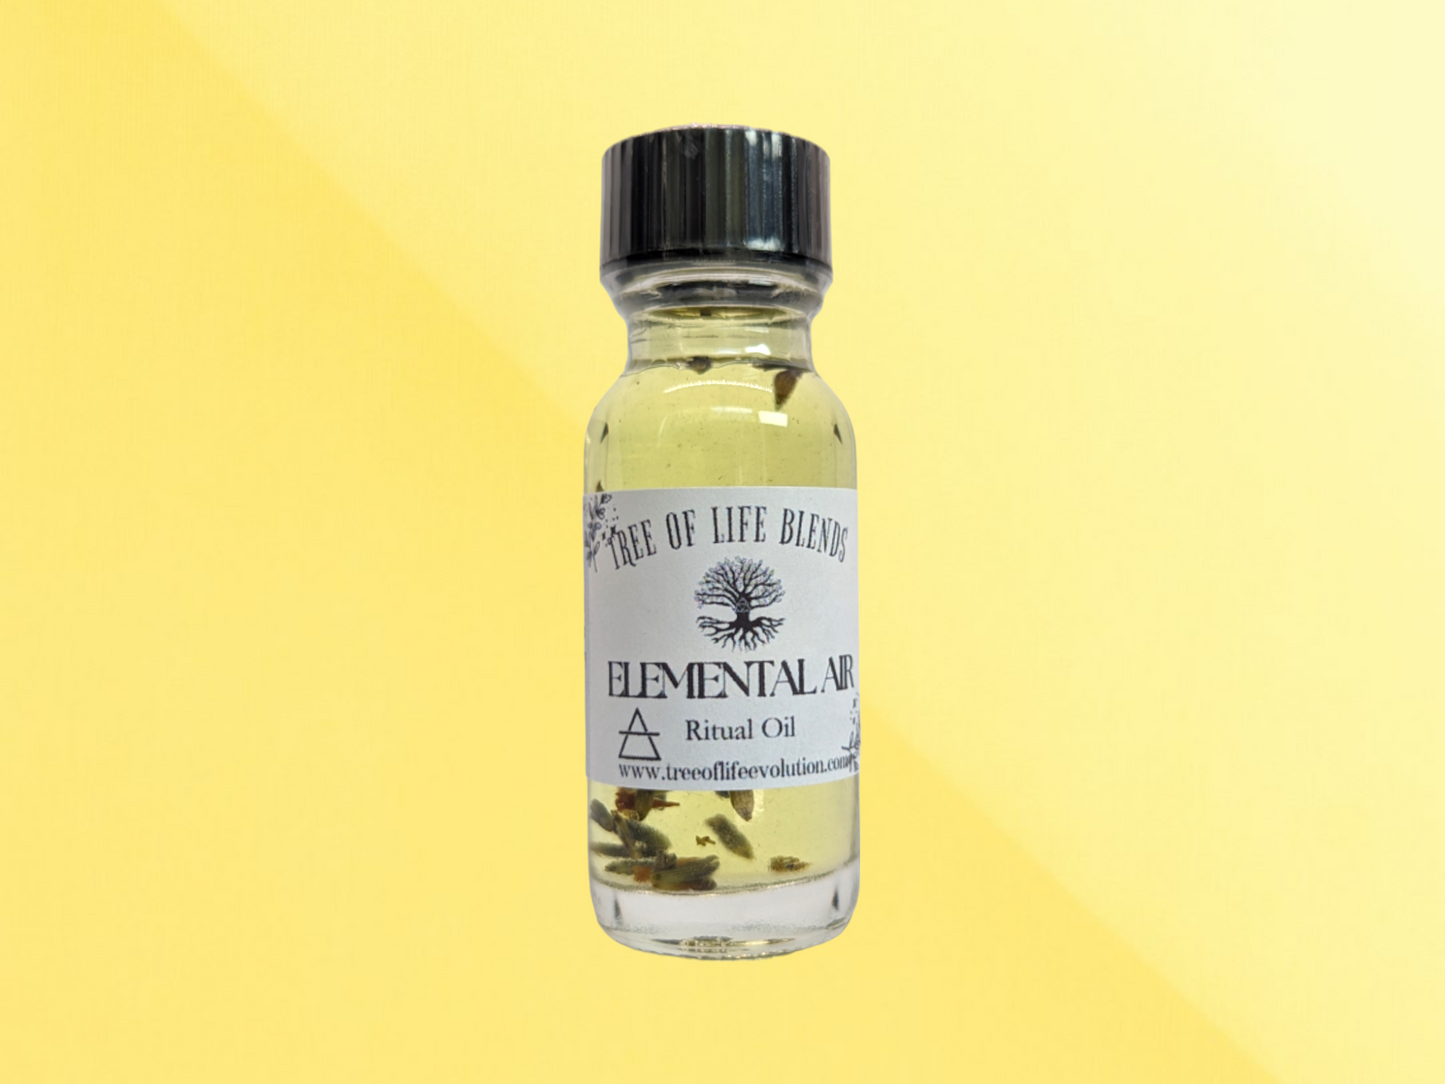 Air Element oil from Tree of Life Evolution on yellow background